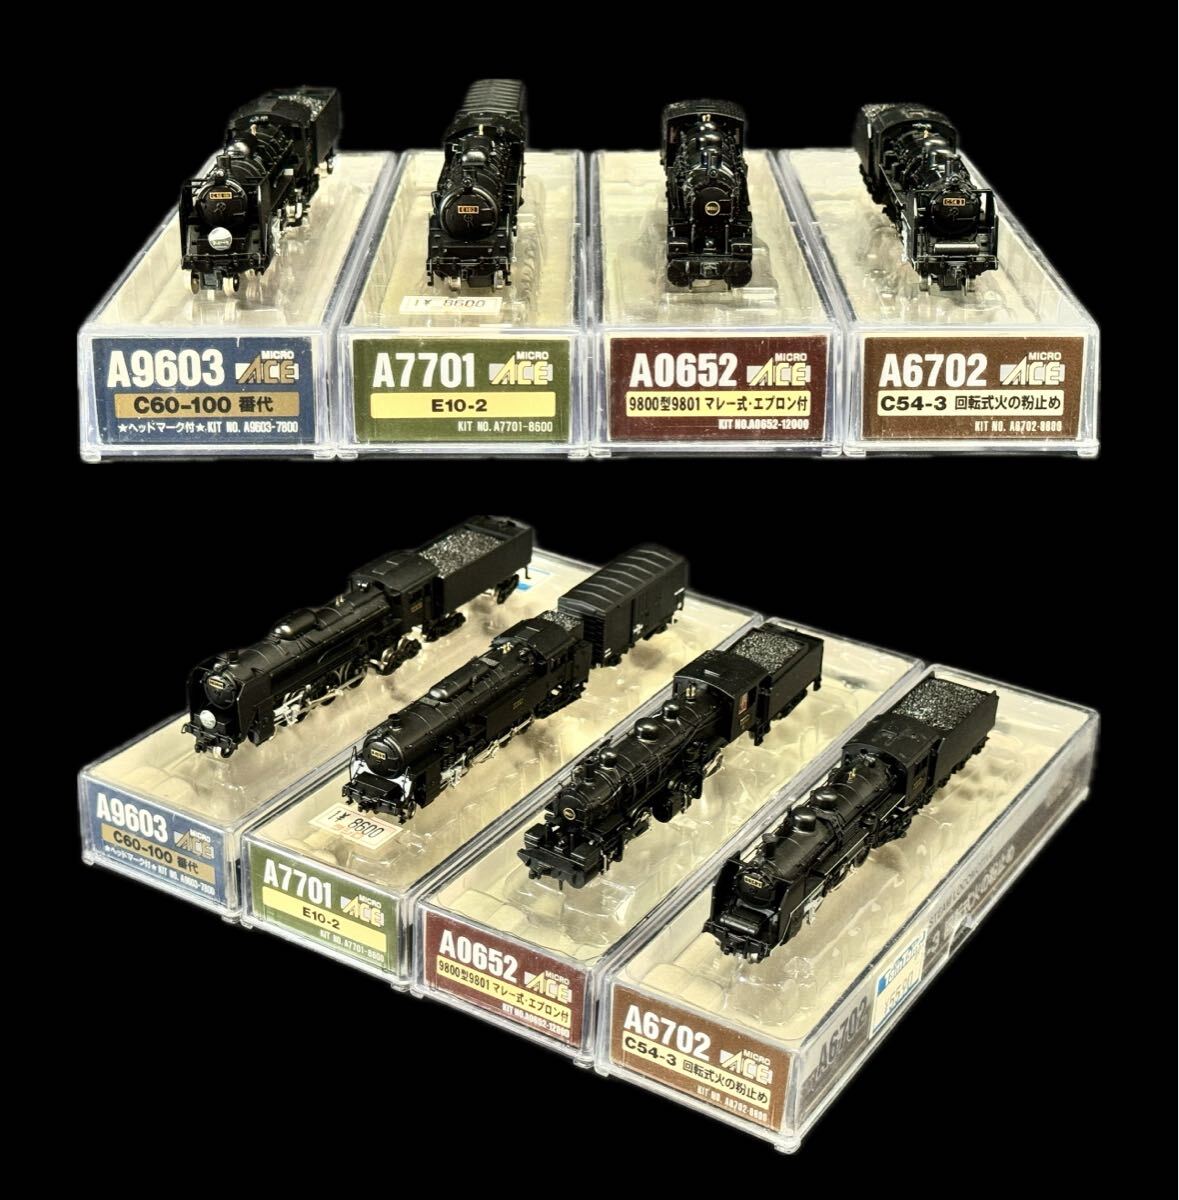 SG-582 micro Ace railroad model 4 point unused A9603 C60-100 number fee A7701 E10-2 A0652 9800 type A6702 C54-3 rotary. flour cease N gauge steam locomotiv 